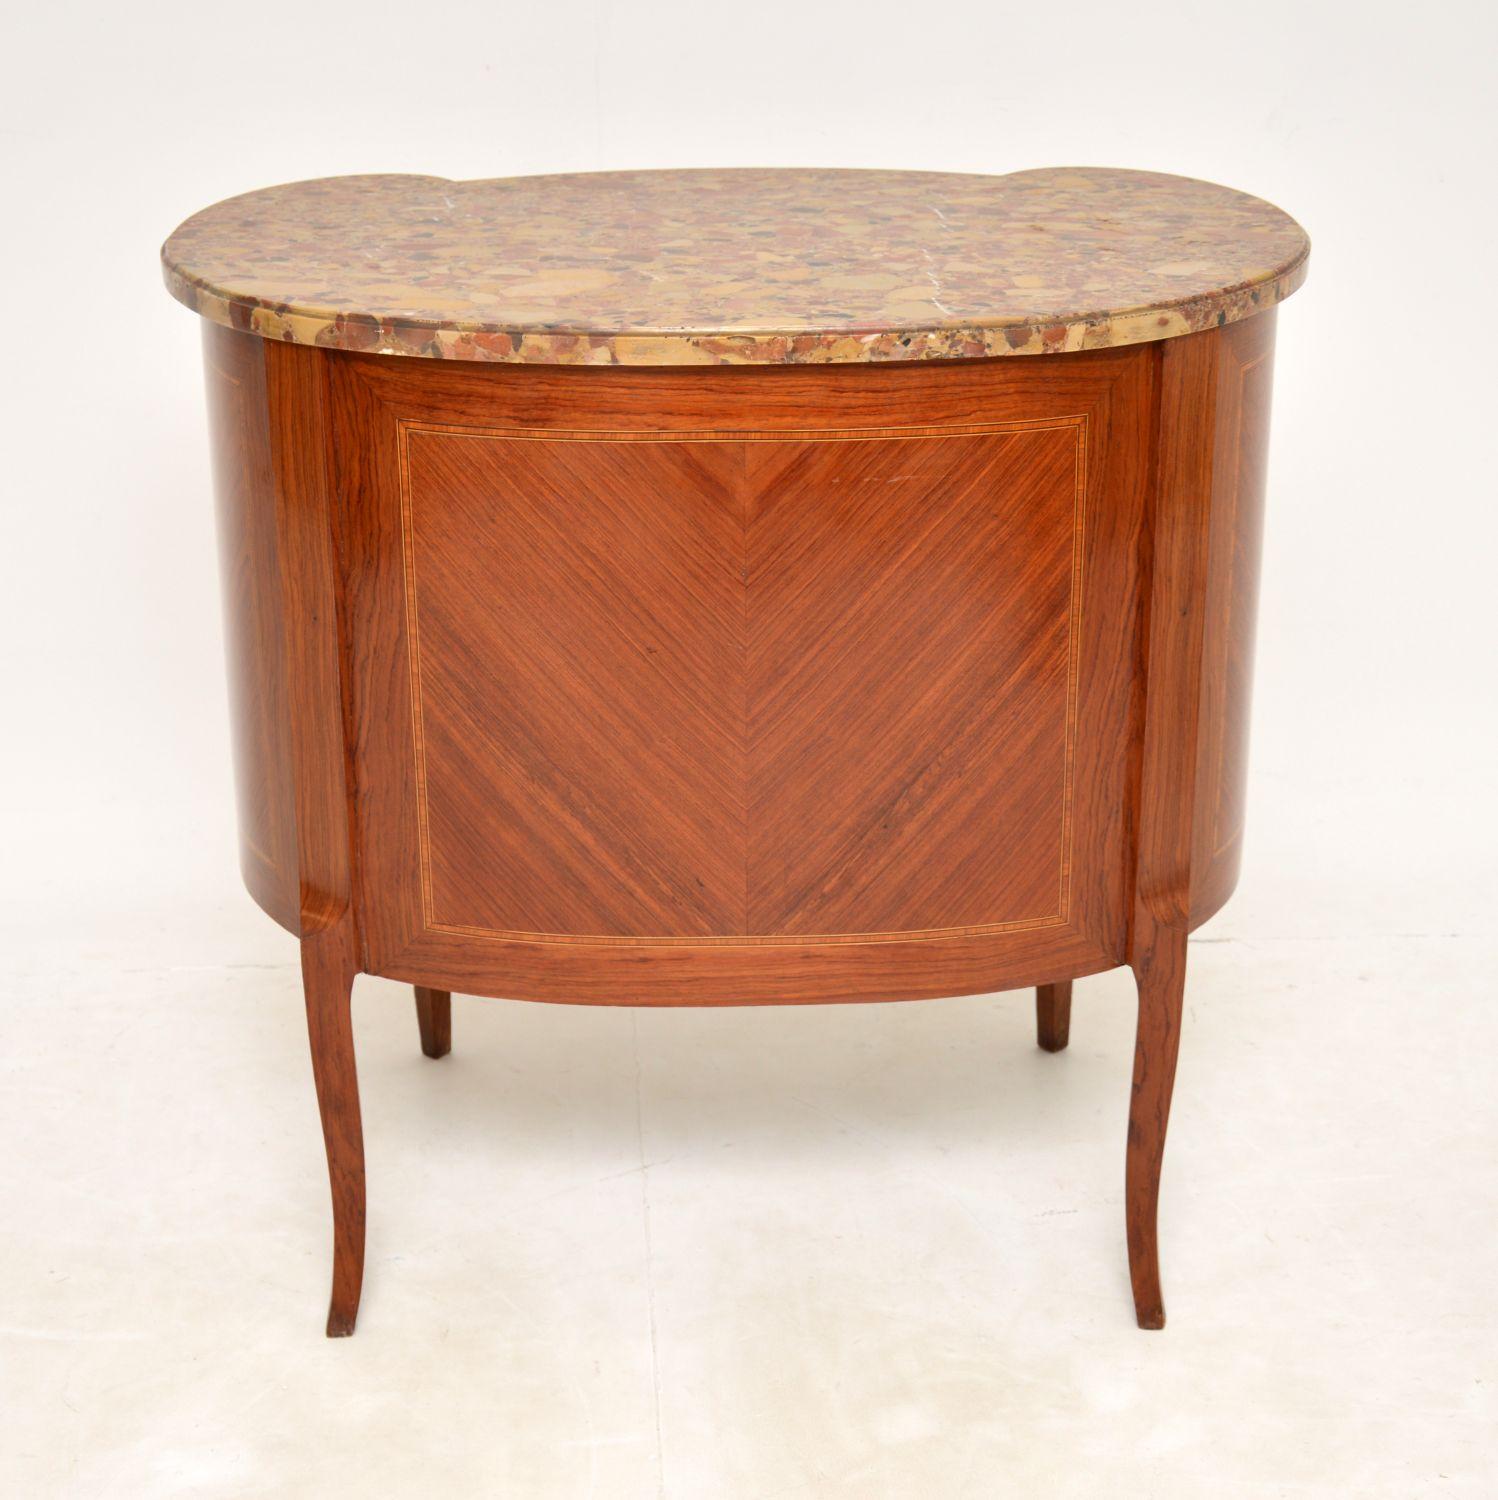 Early 20th Century Antique French Inlaid Wood Marble Top Commode